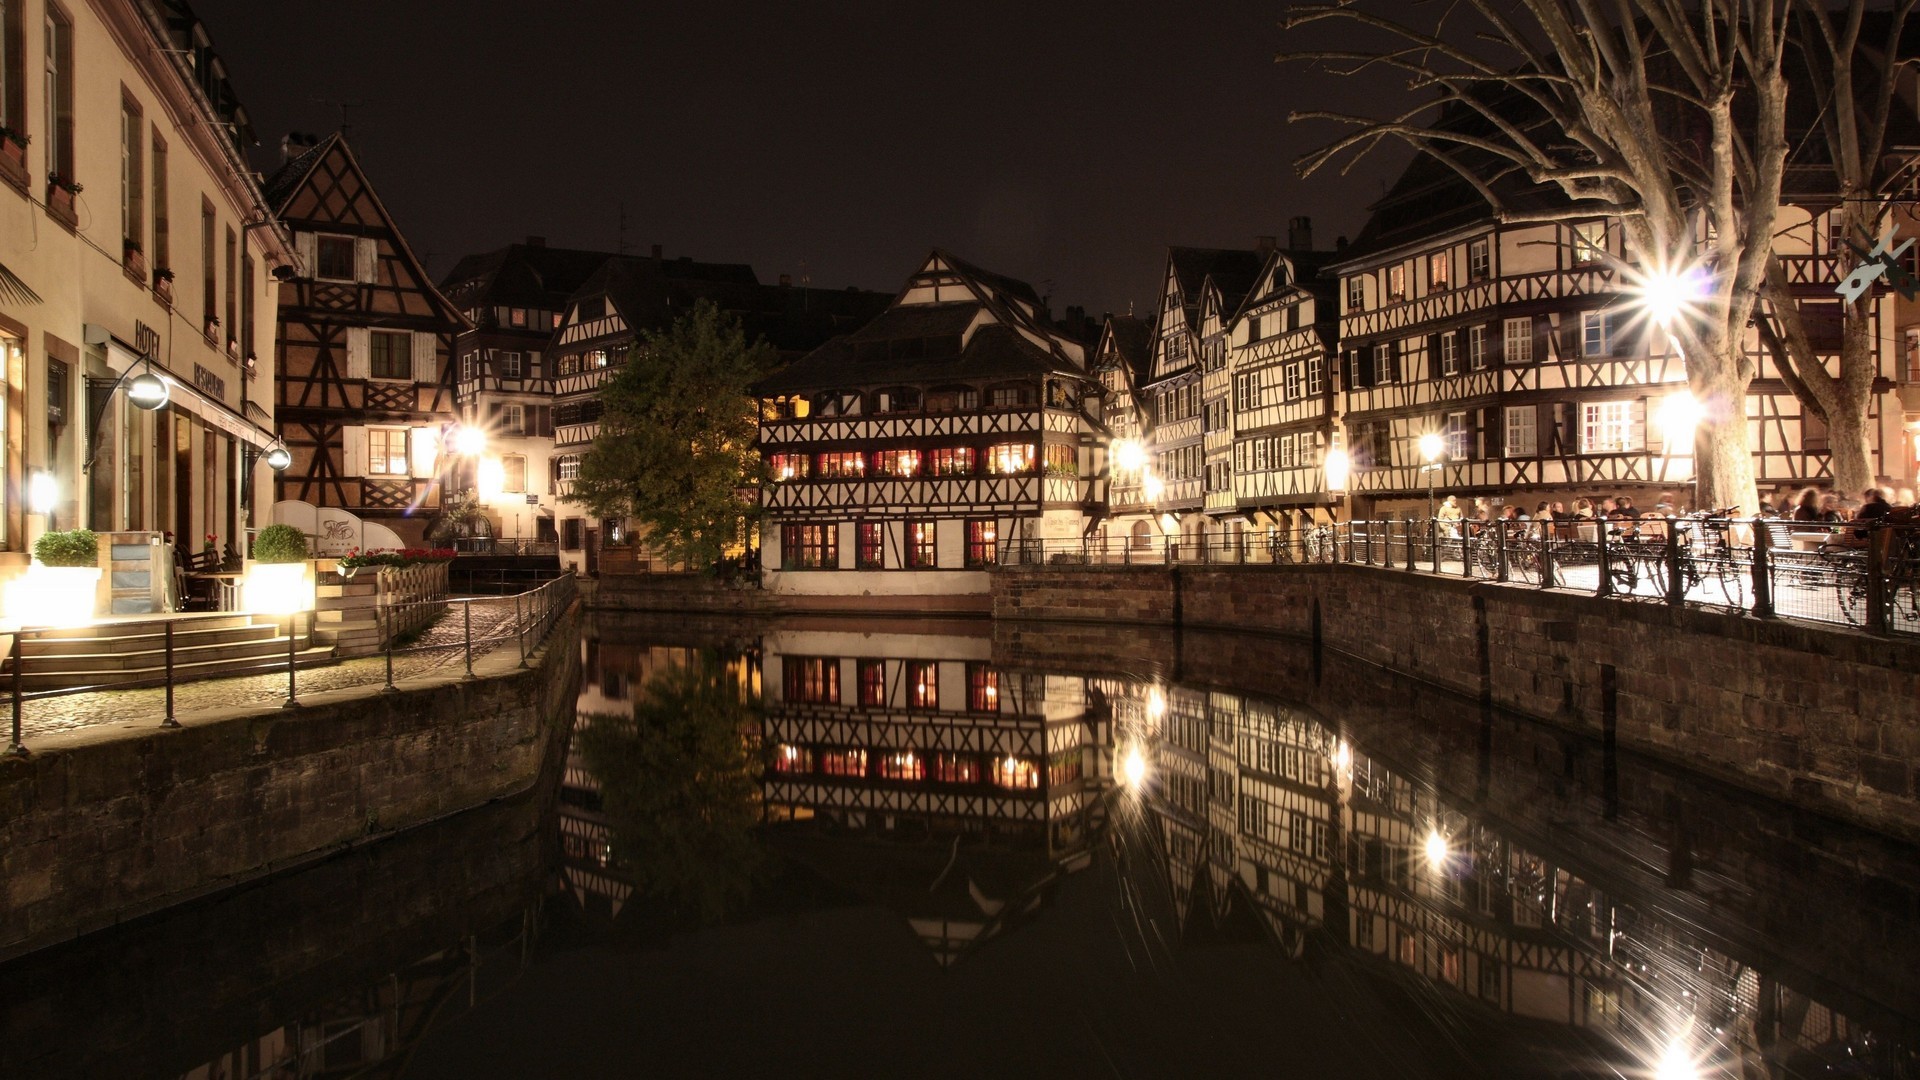 General 1920x1080 cityscape city building lights Strasbourg city lights reflection night canal